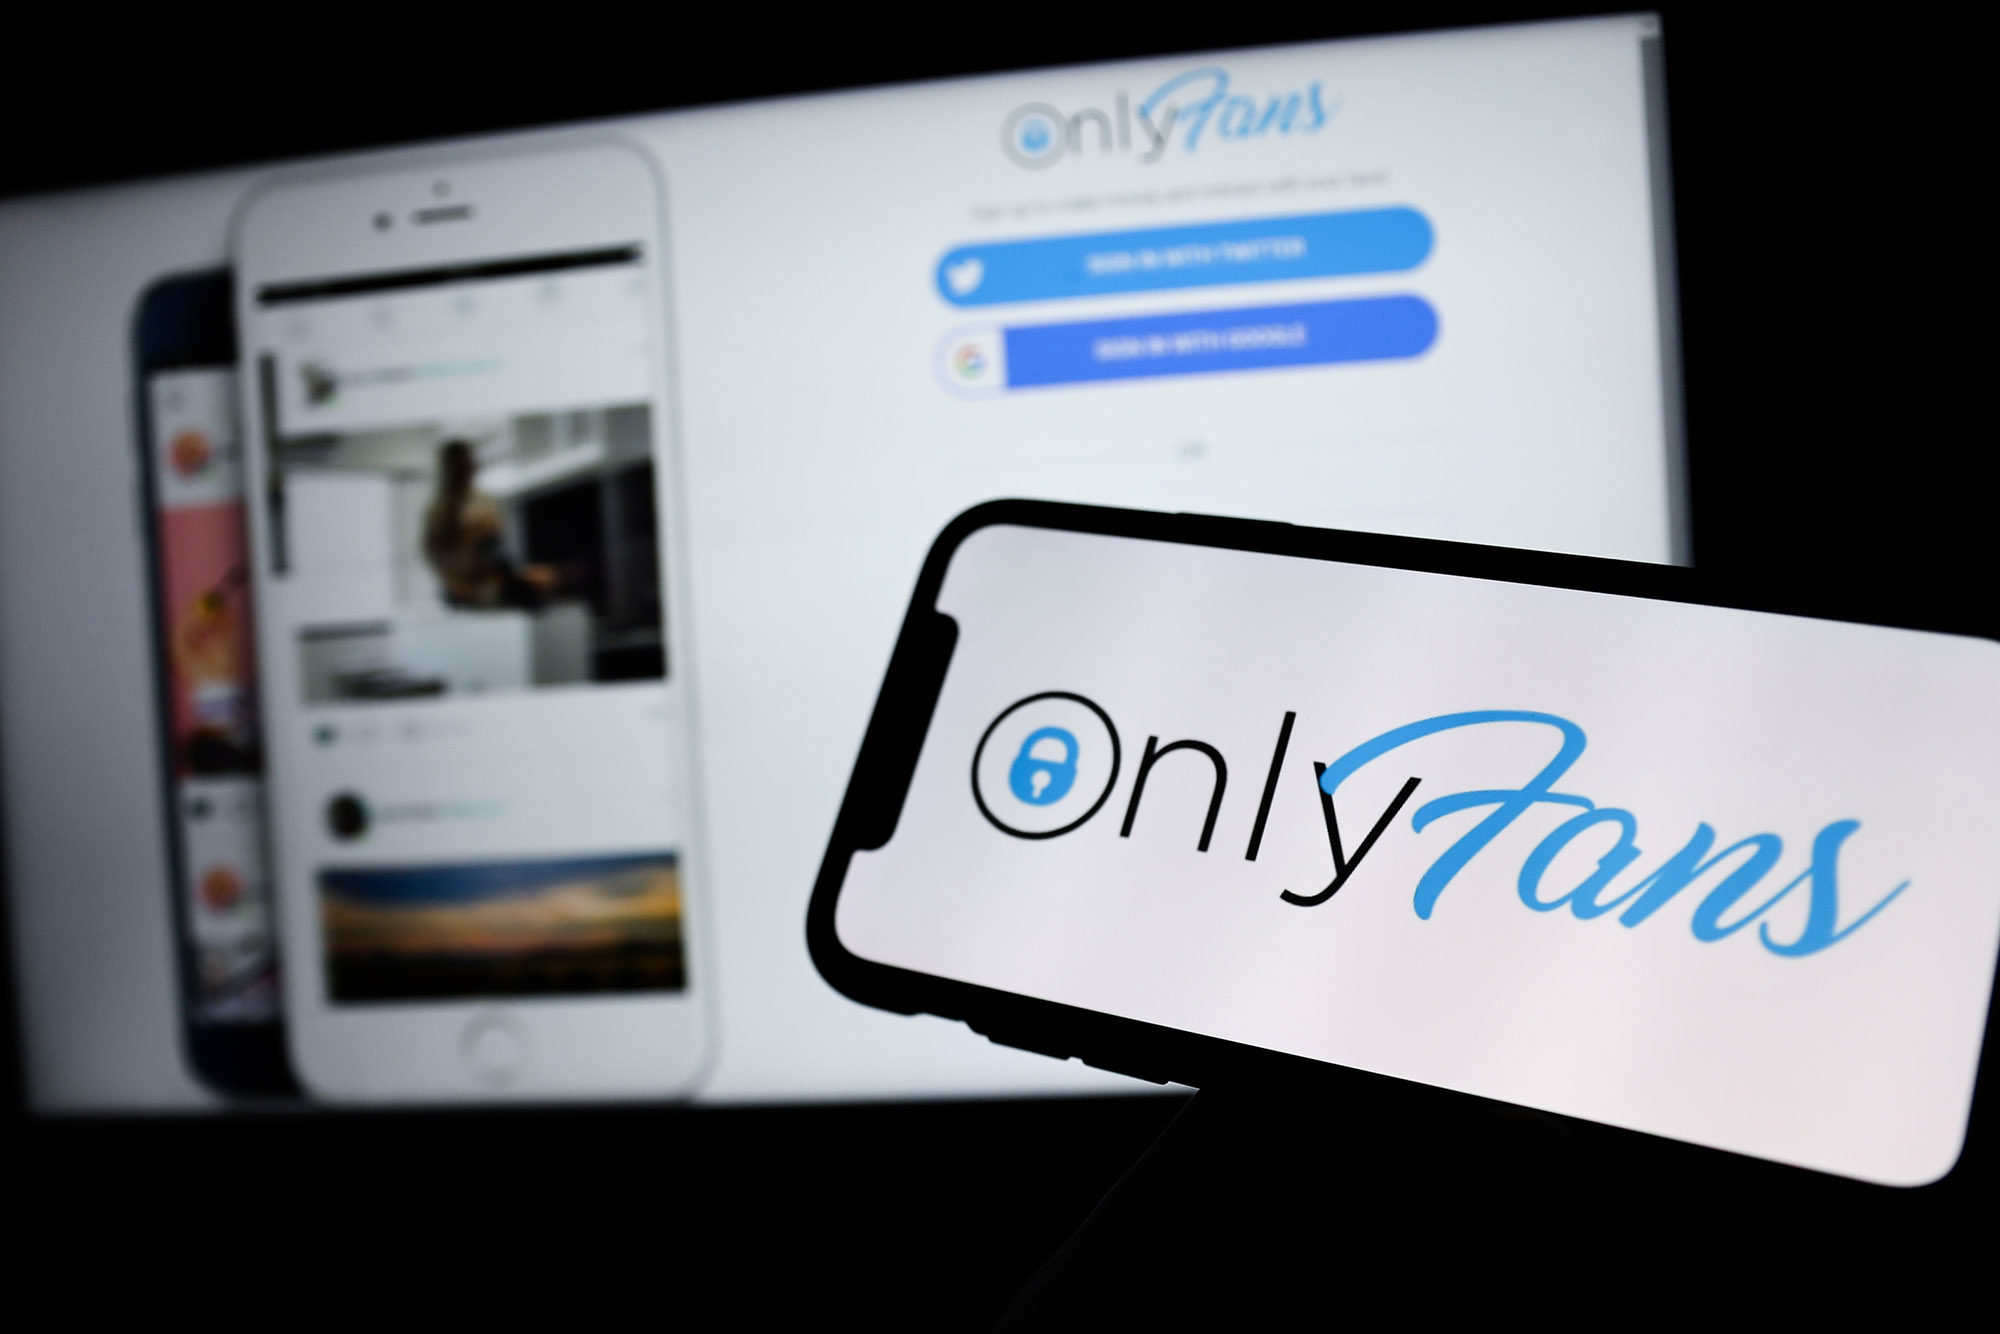 OnlyFans Website May Be Worth $1 Billion After New Startup Funding - Bloomberg